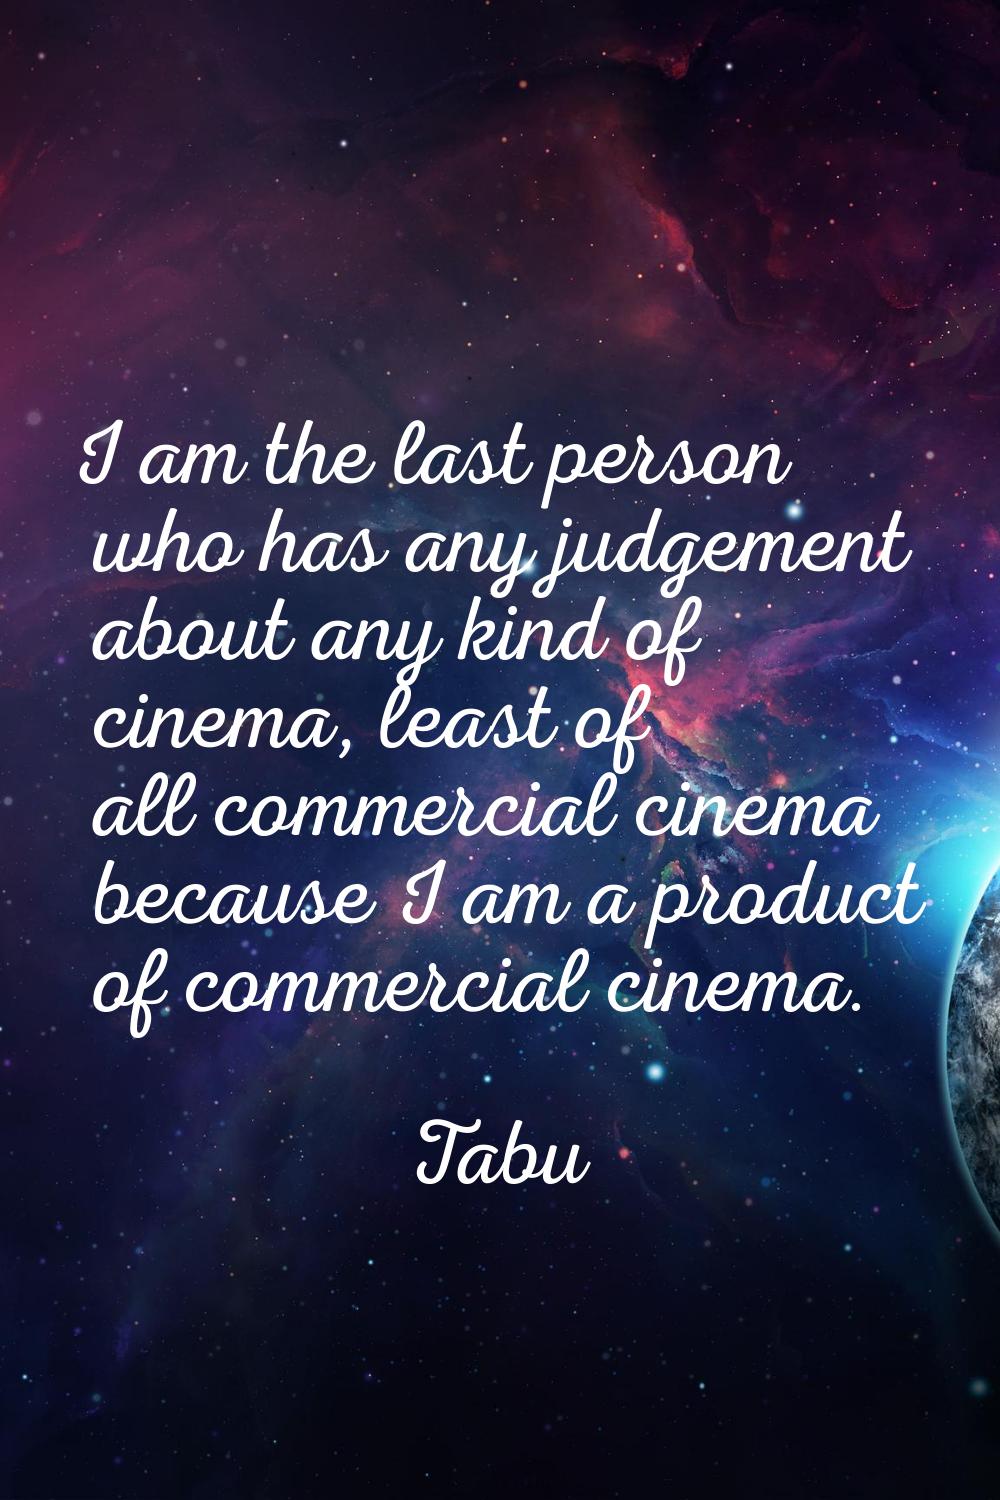 I am the last person who has any judgement about any kind of cinema, least of all commercial cinema